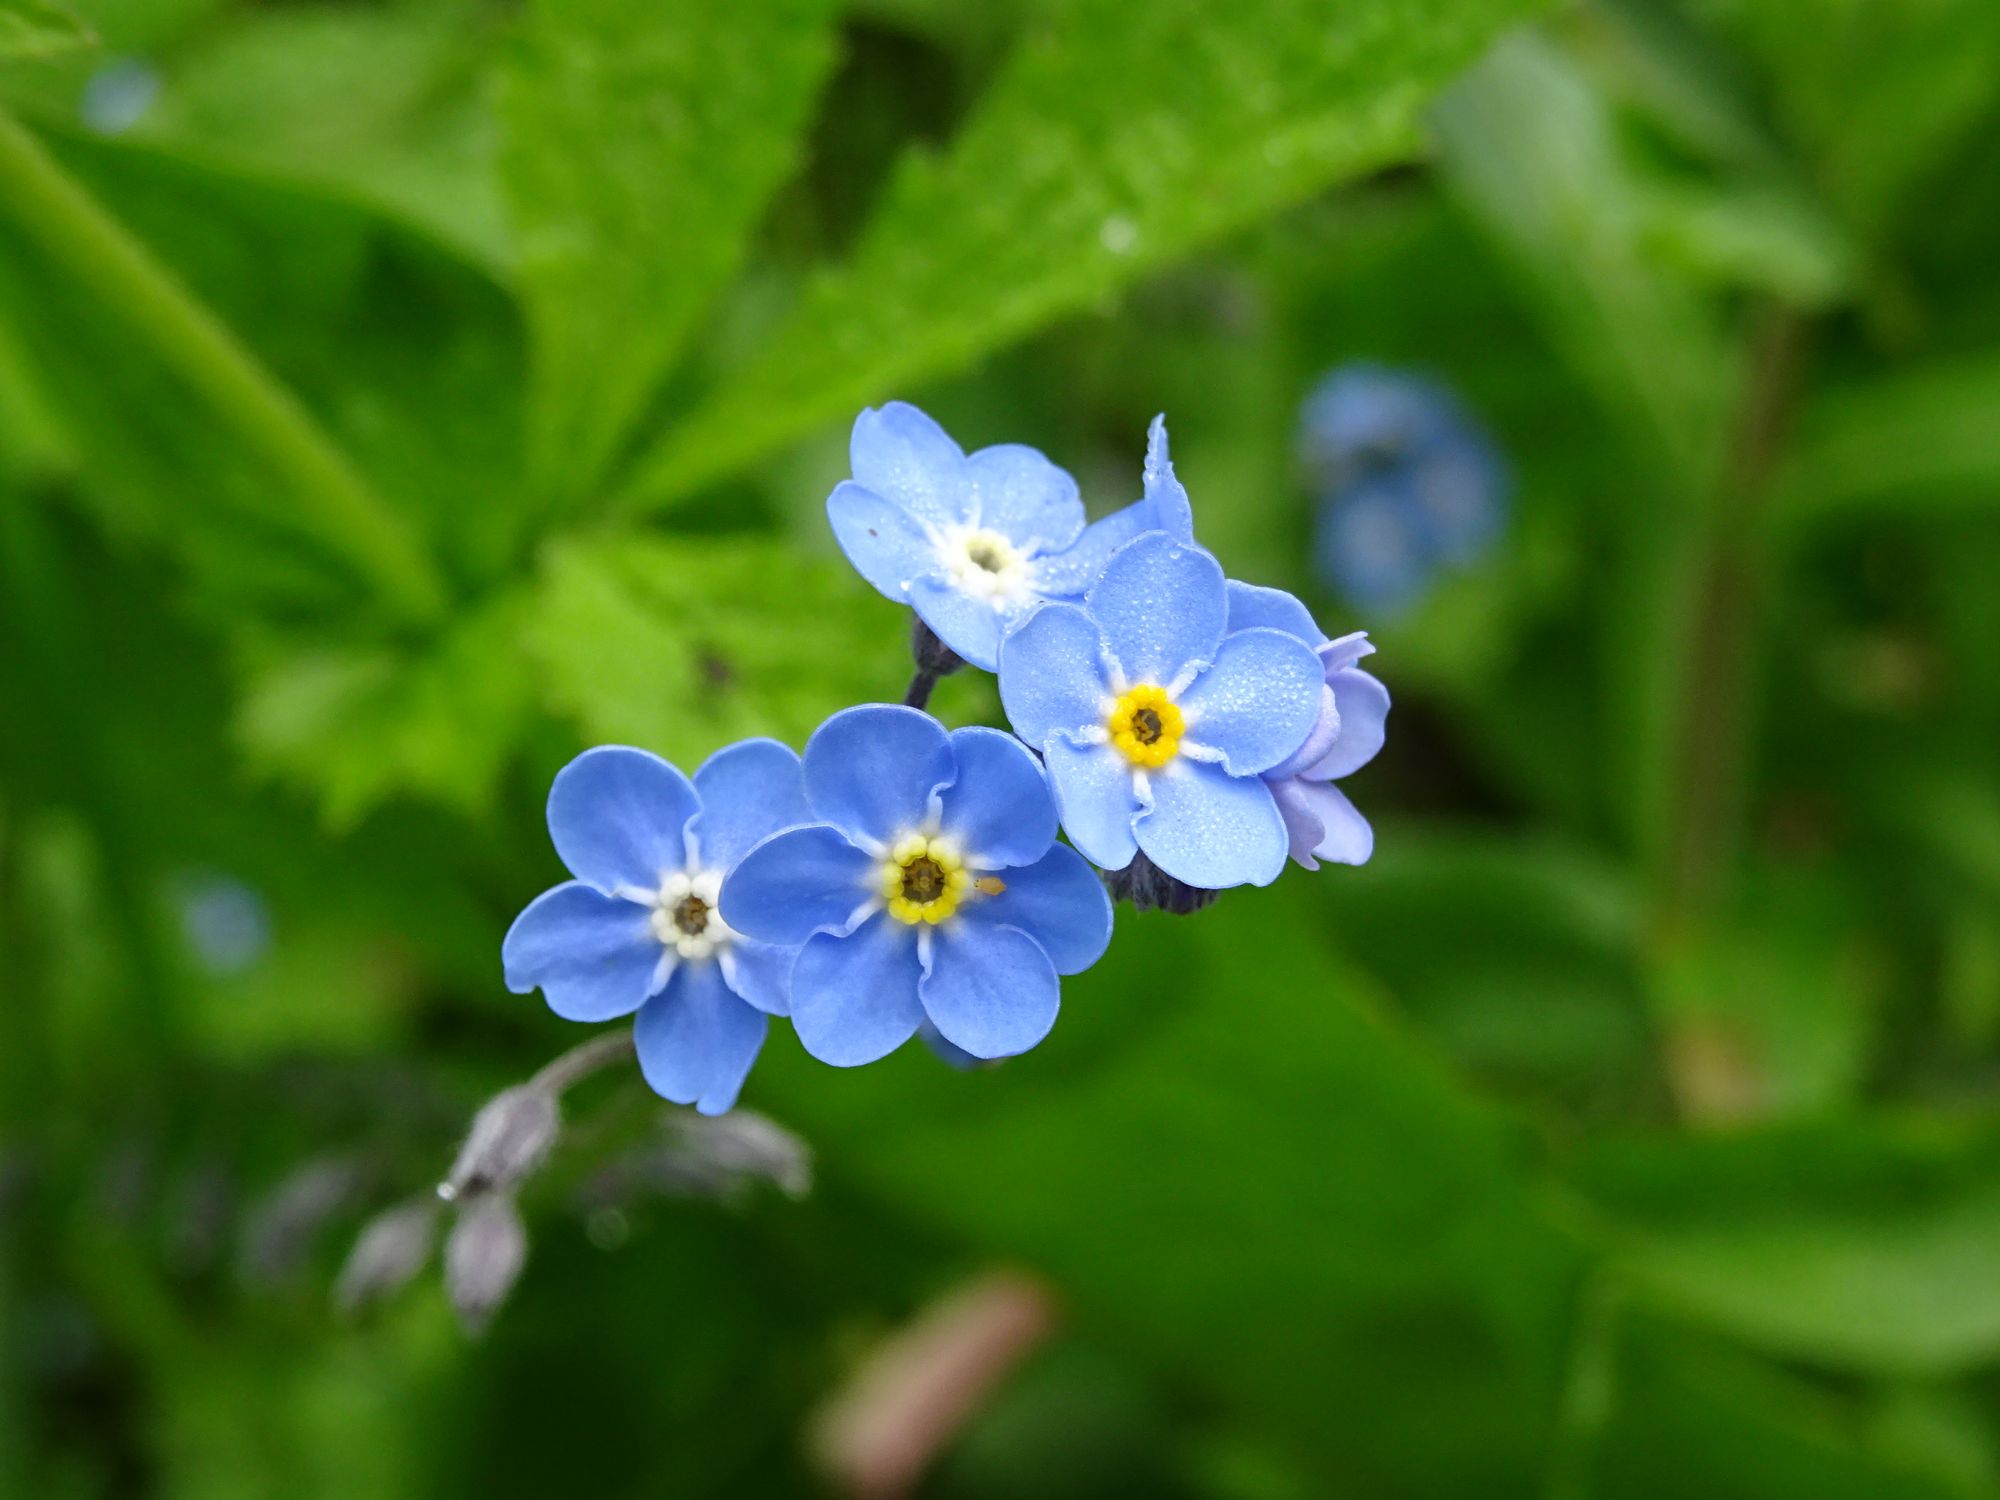 Forget-me-not flowers: small blue flowers with yellow centres against a green leafy background